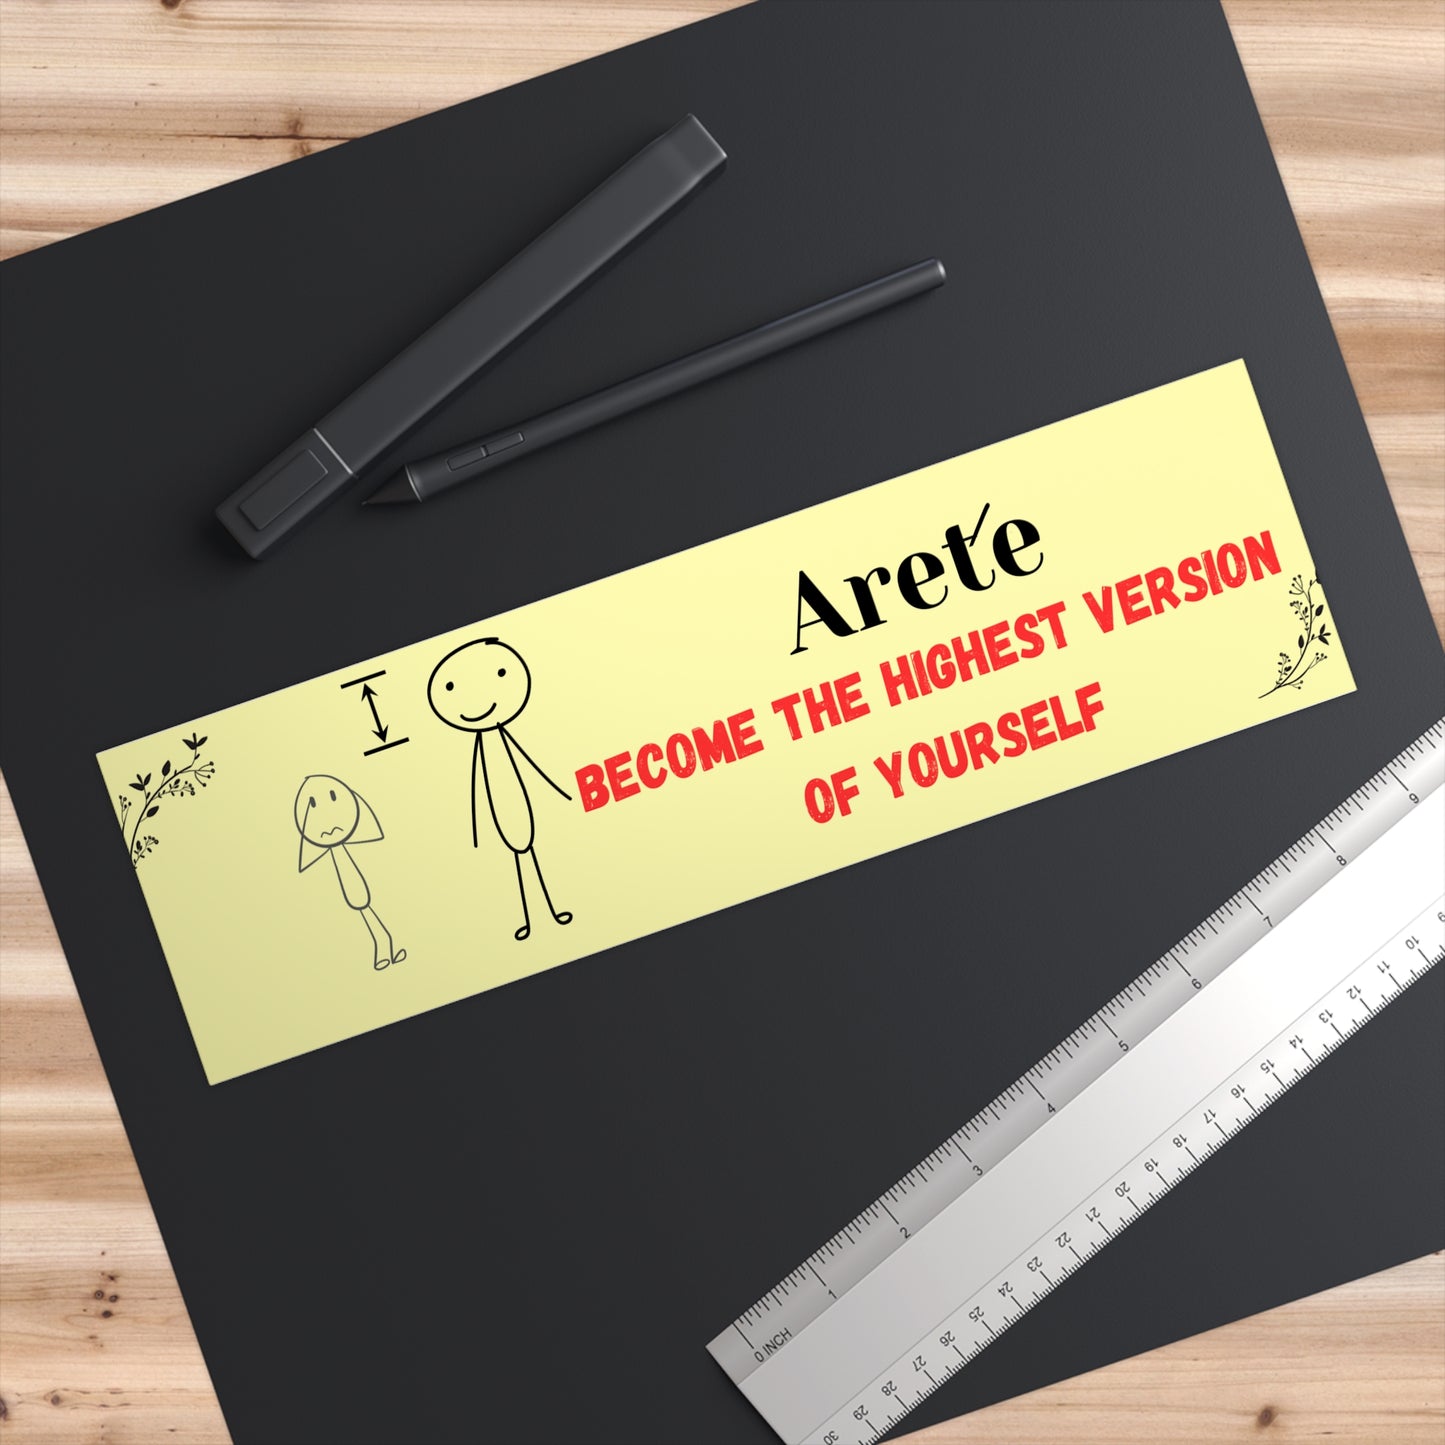 Arete - Become the highest version of yourself Bumper Stickers